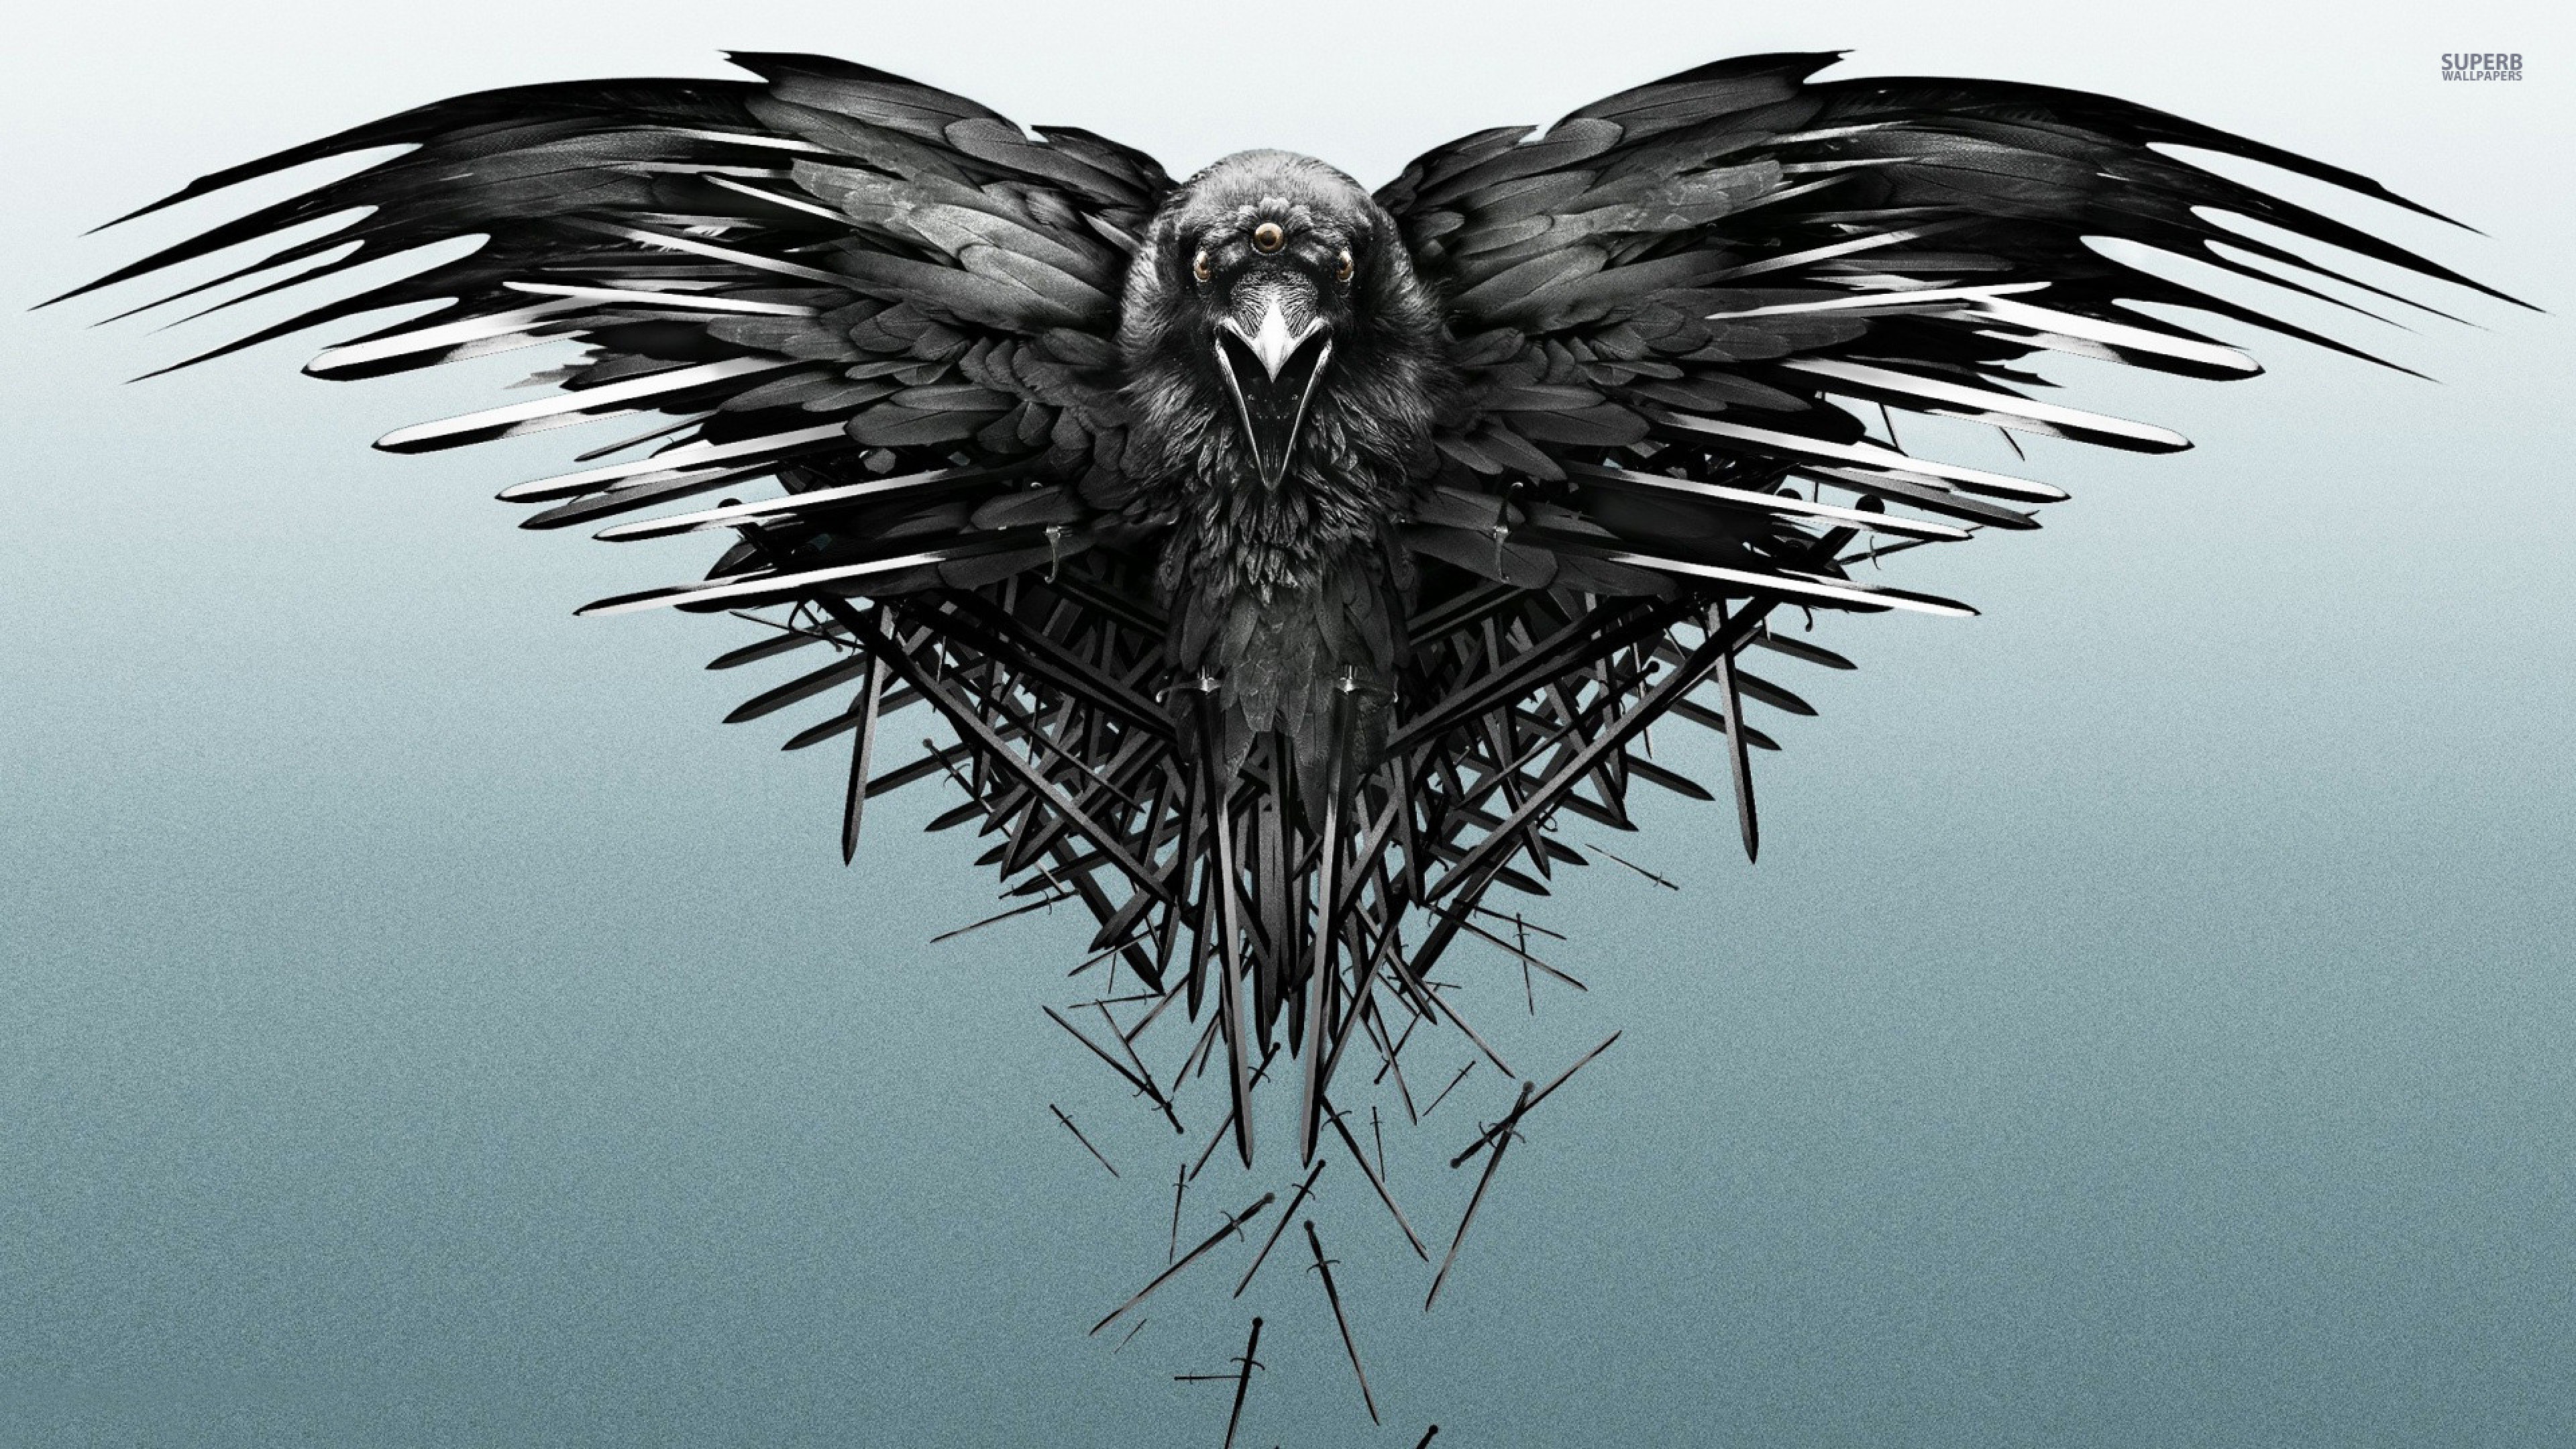 Free Download Game Of Thrones Wallpaper For Desktop And Mobiles 4k